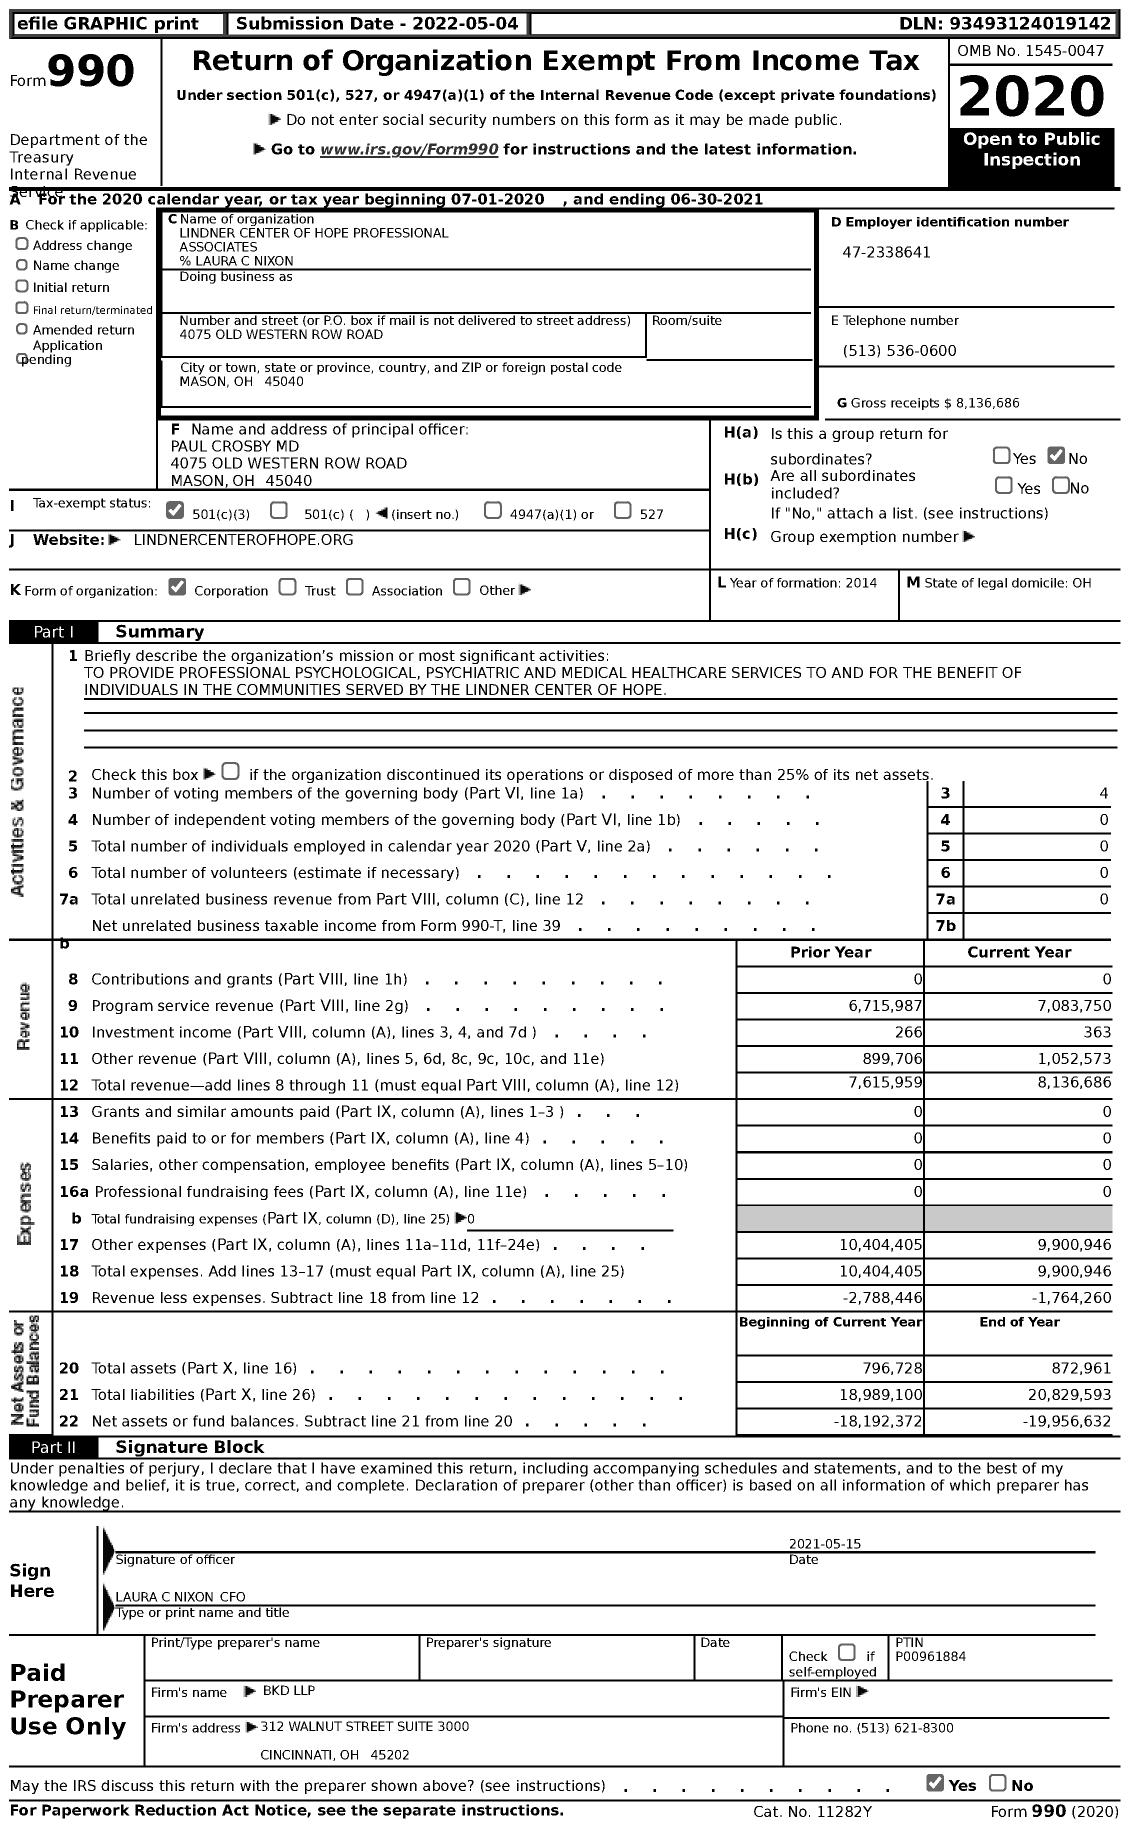 Image of first page of 2020 Form 990 for Lindner Center of Hope Professional Associates